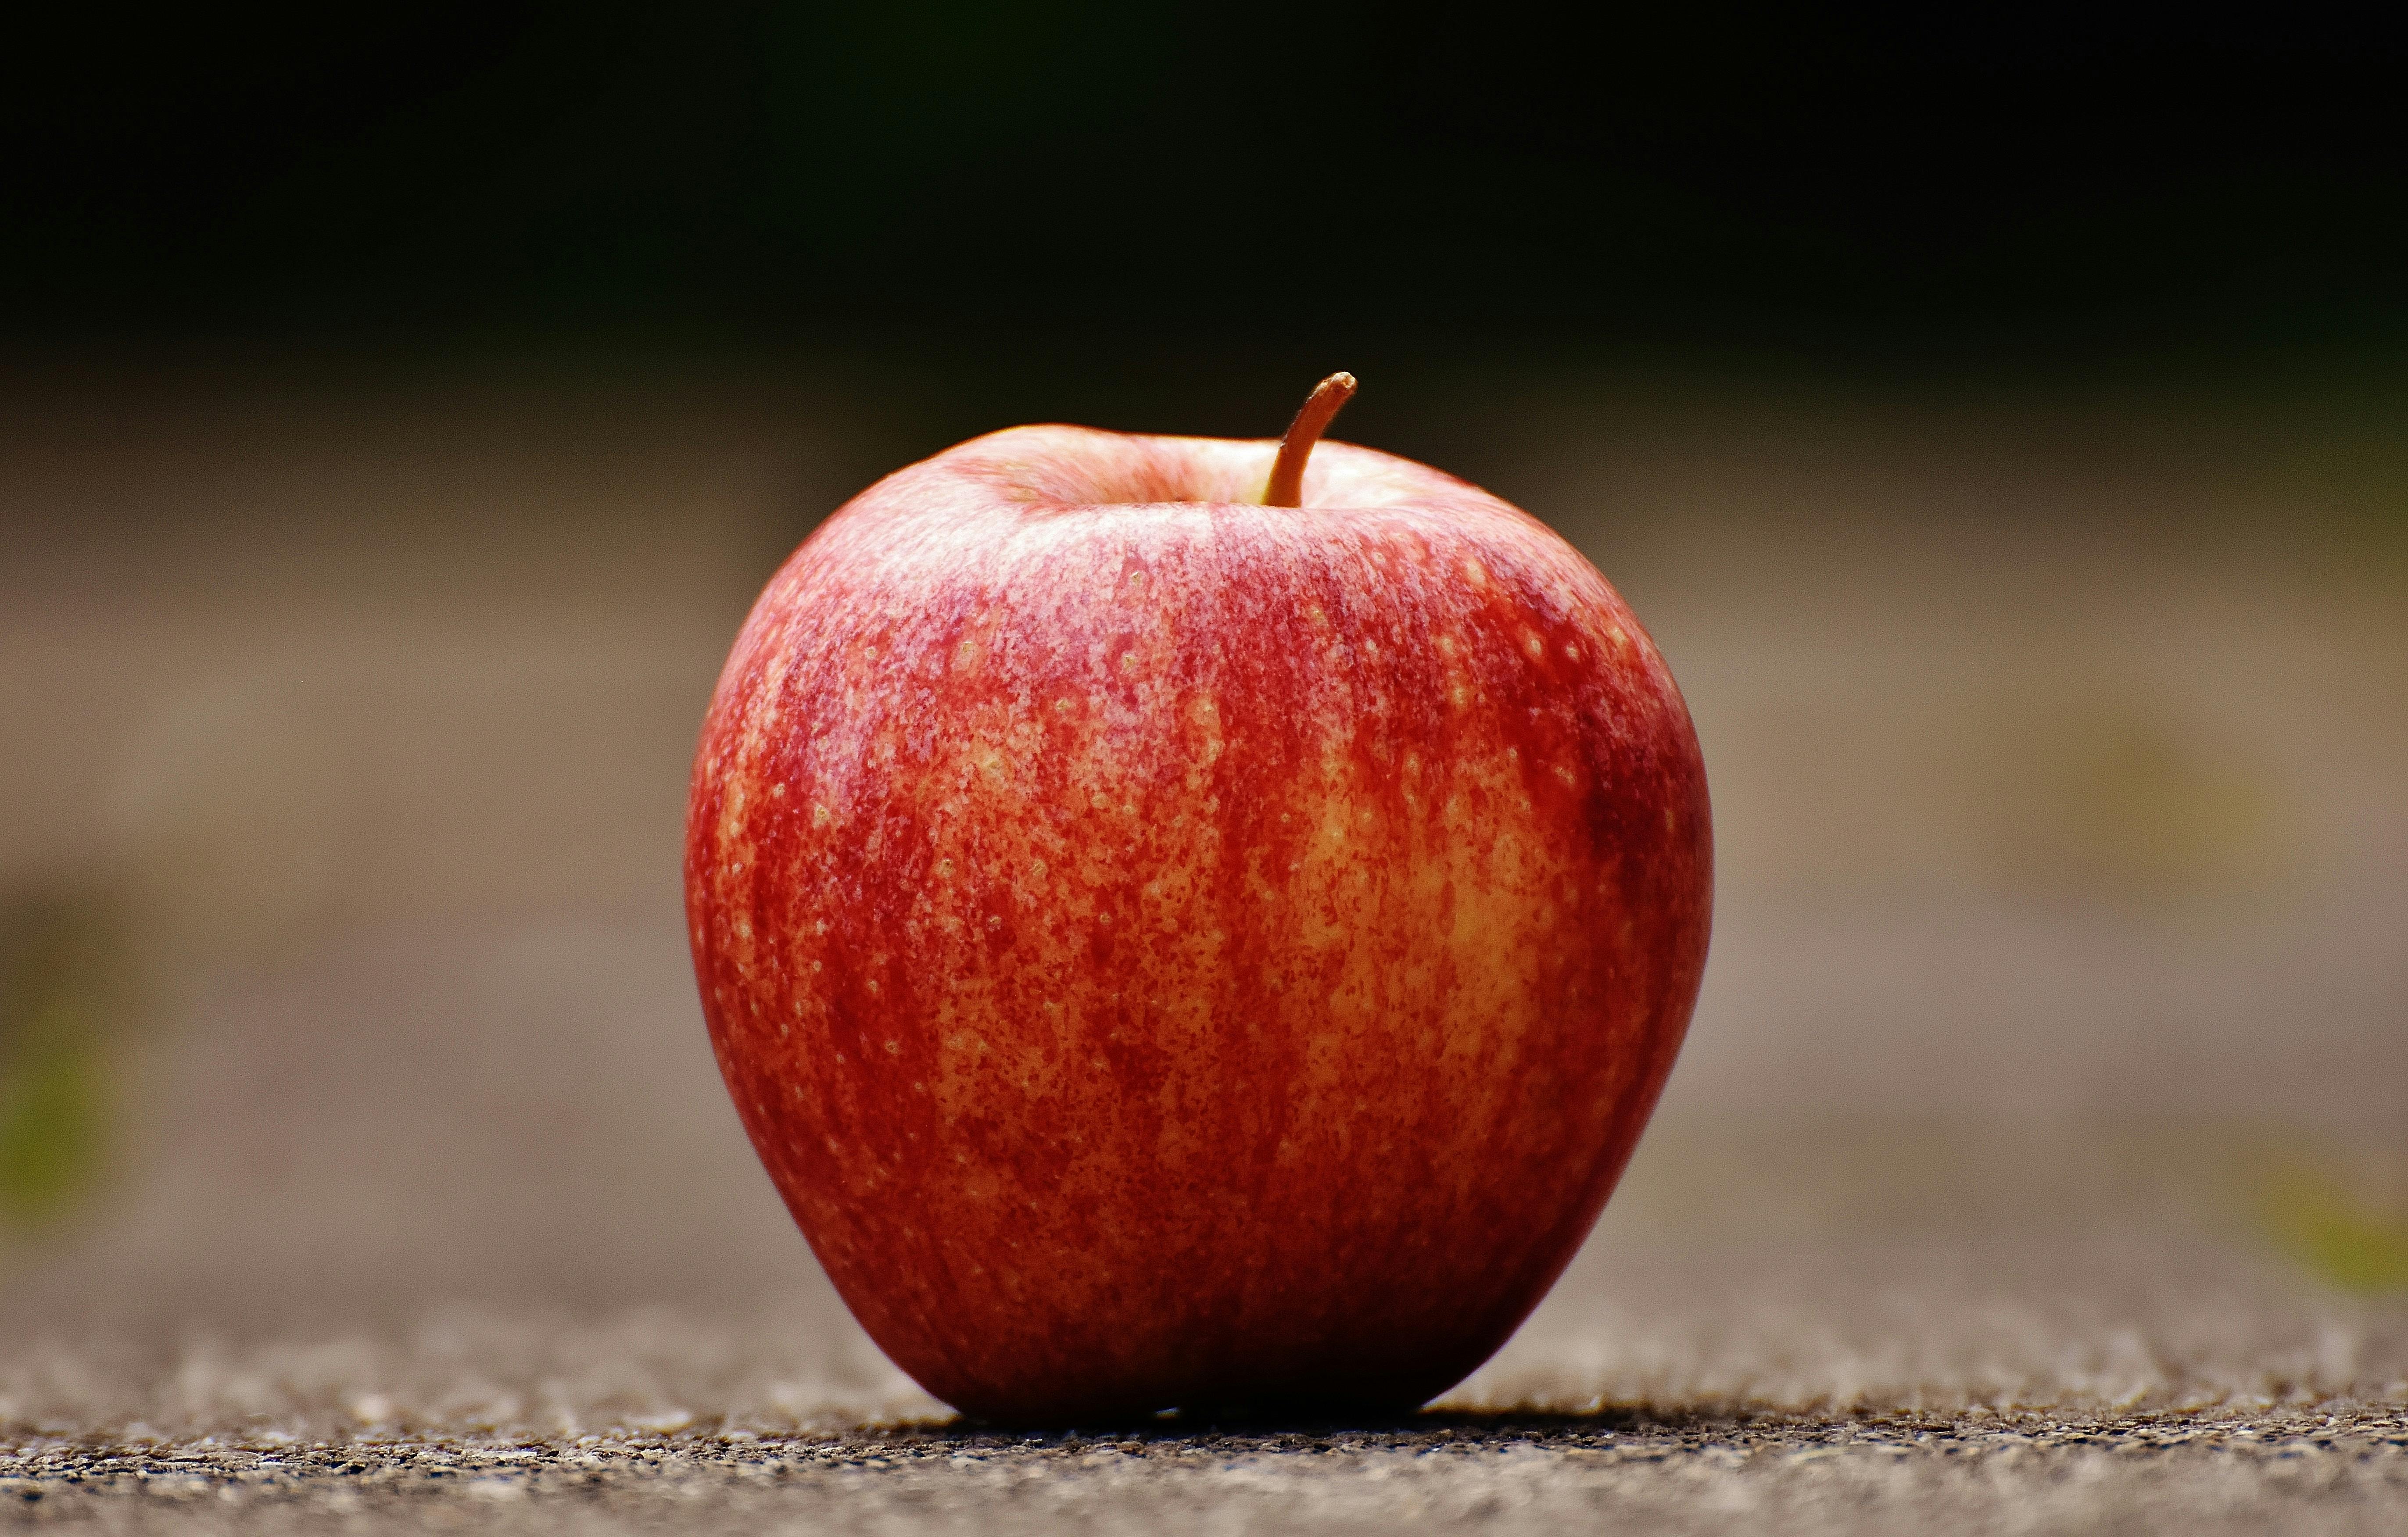 Apple Photos, Download The BEST Free Apple Stock Photos & HD Images